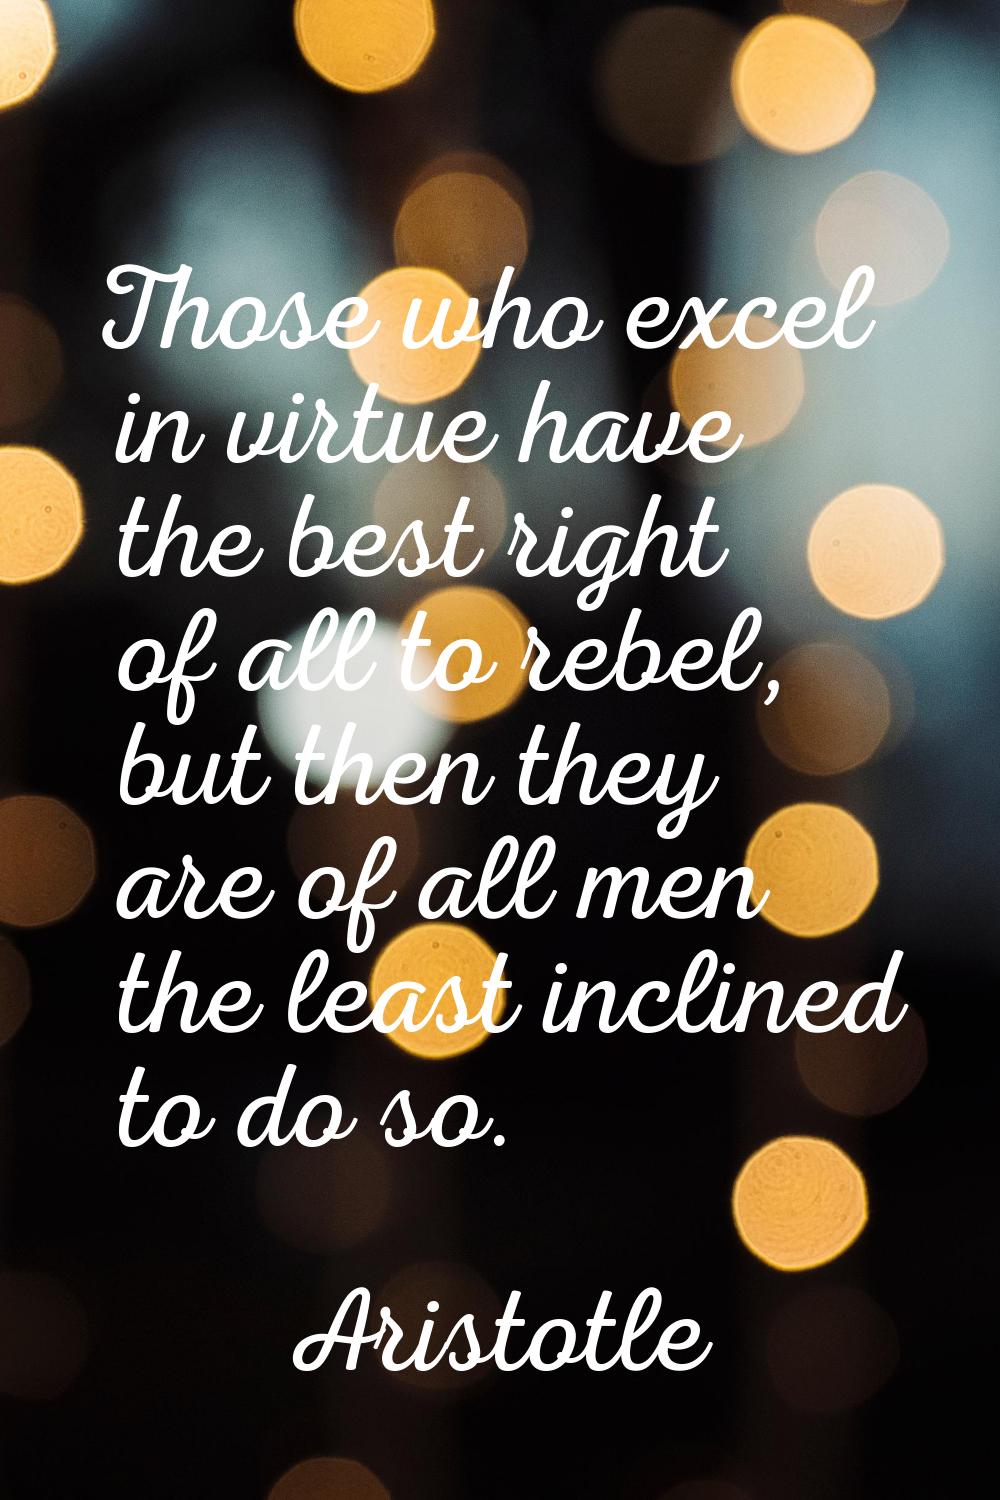 Those who excel in virtue have the best right of all to rebel, but then they are of all men the lea